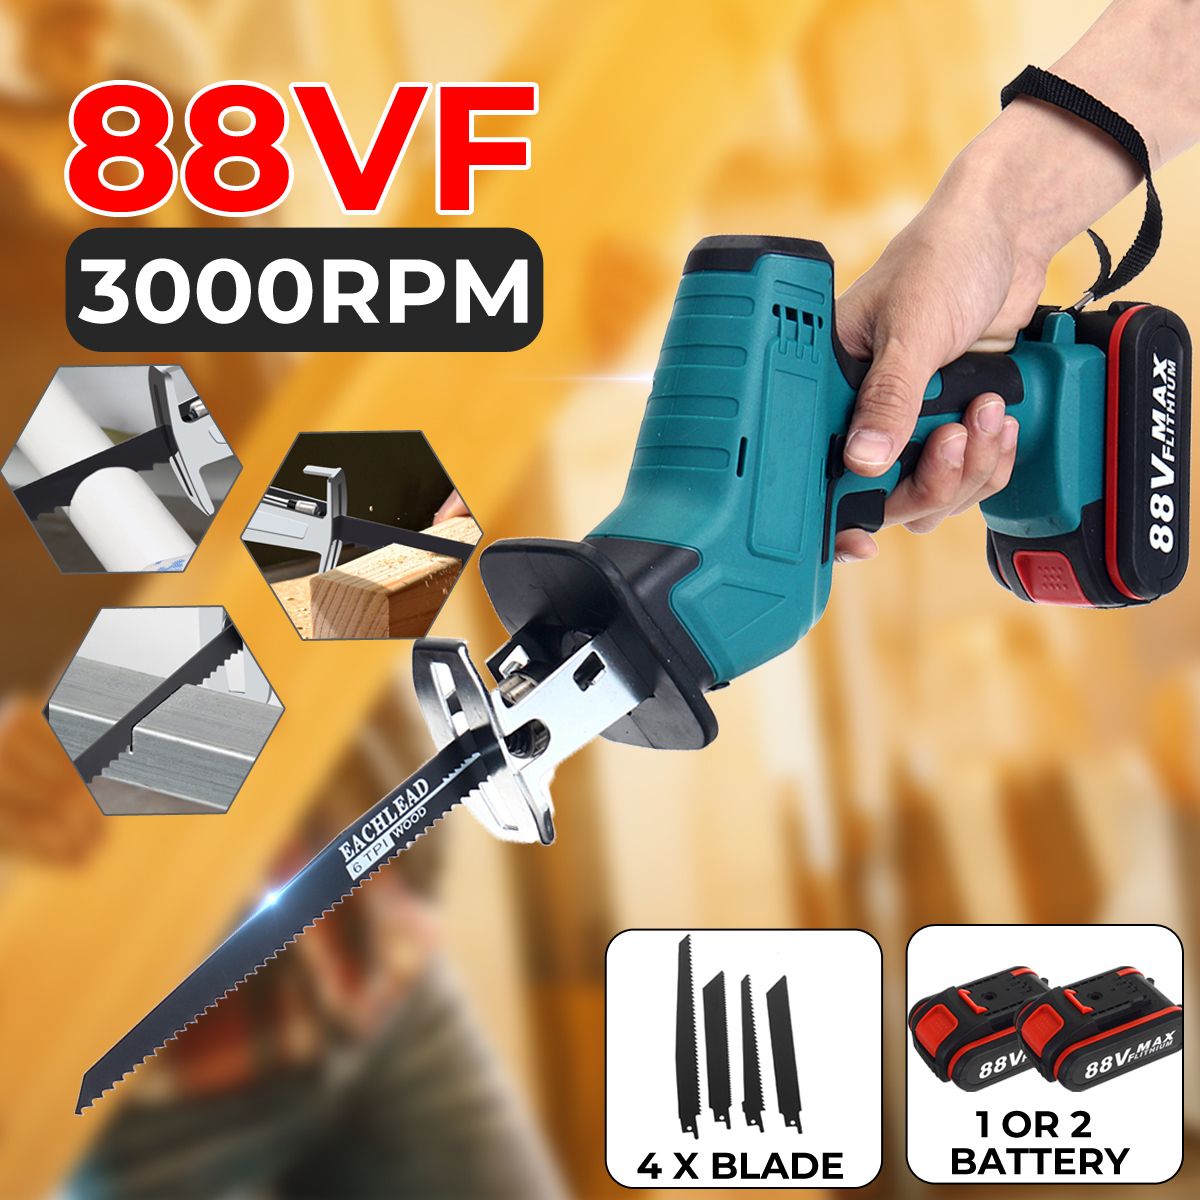 88VF-Cordless-Electric-Reciprocating-Saw-Garden-Wood-Cutting-Pruning-Saw-1761115